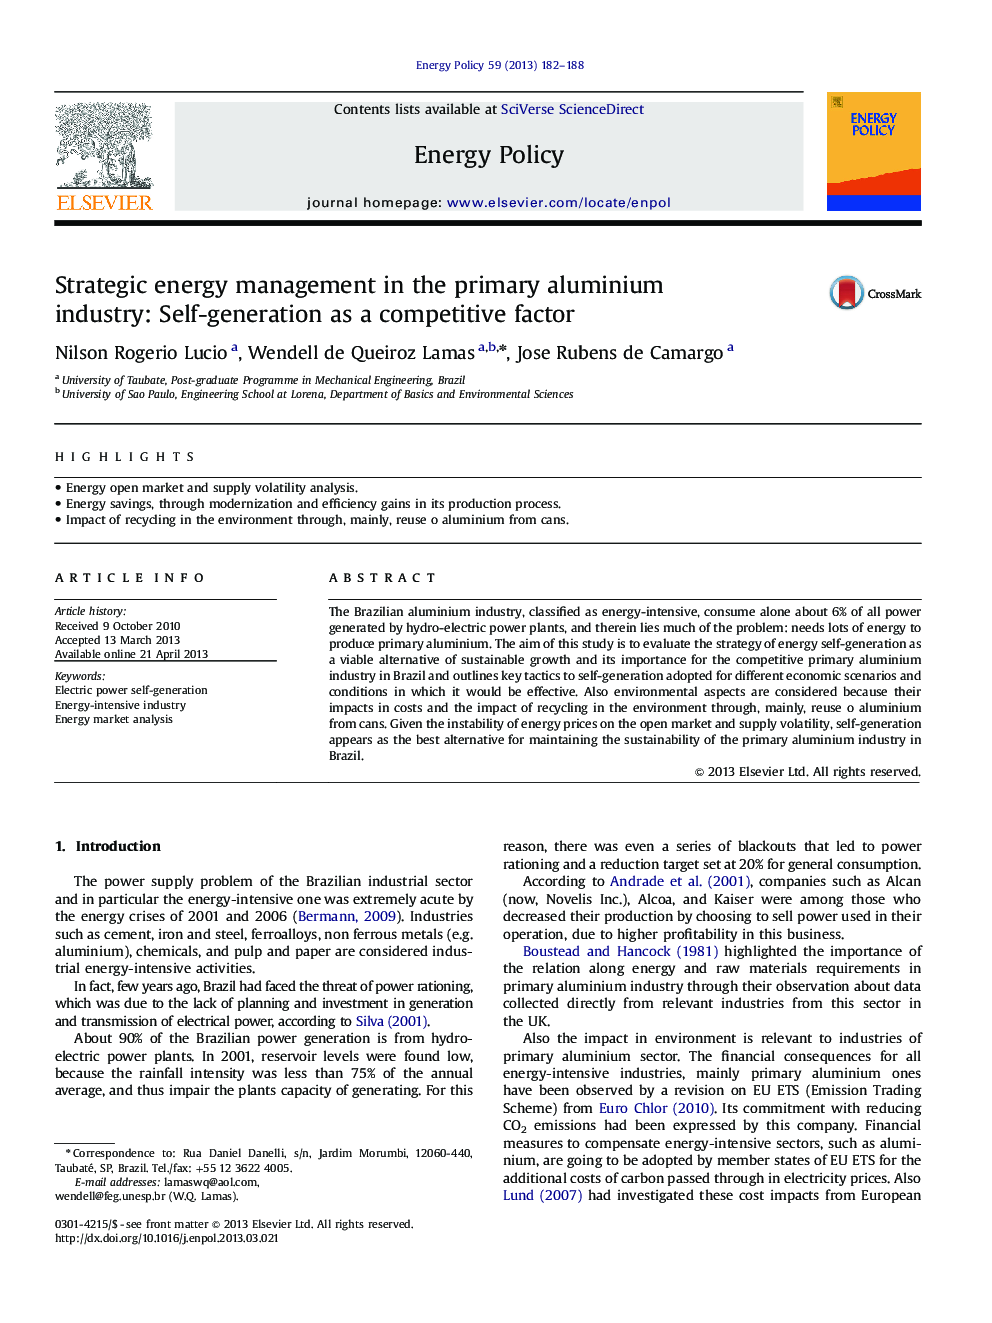 Strategic energy management in the primary aluminium industry: Self-generation as a competitive factor